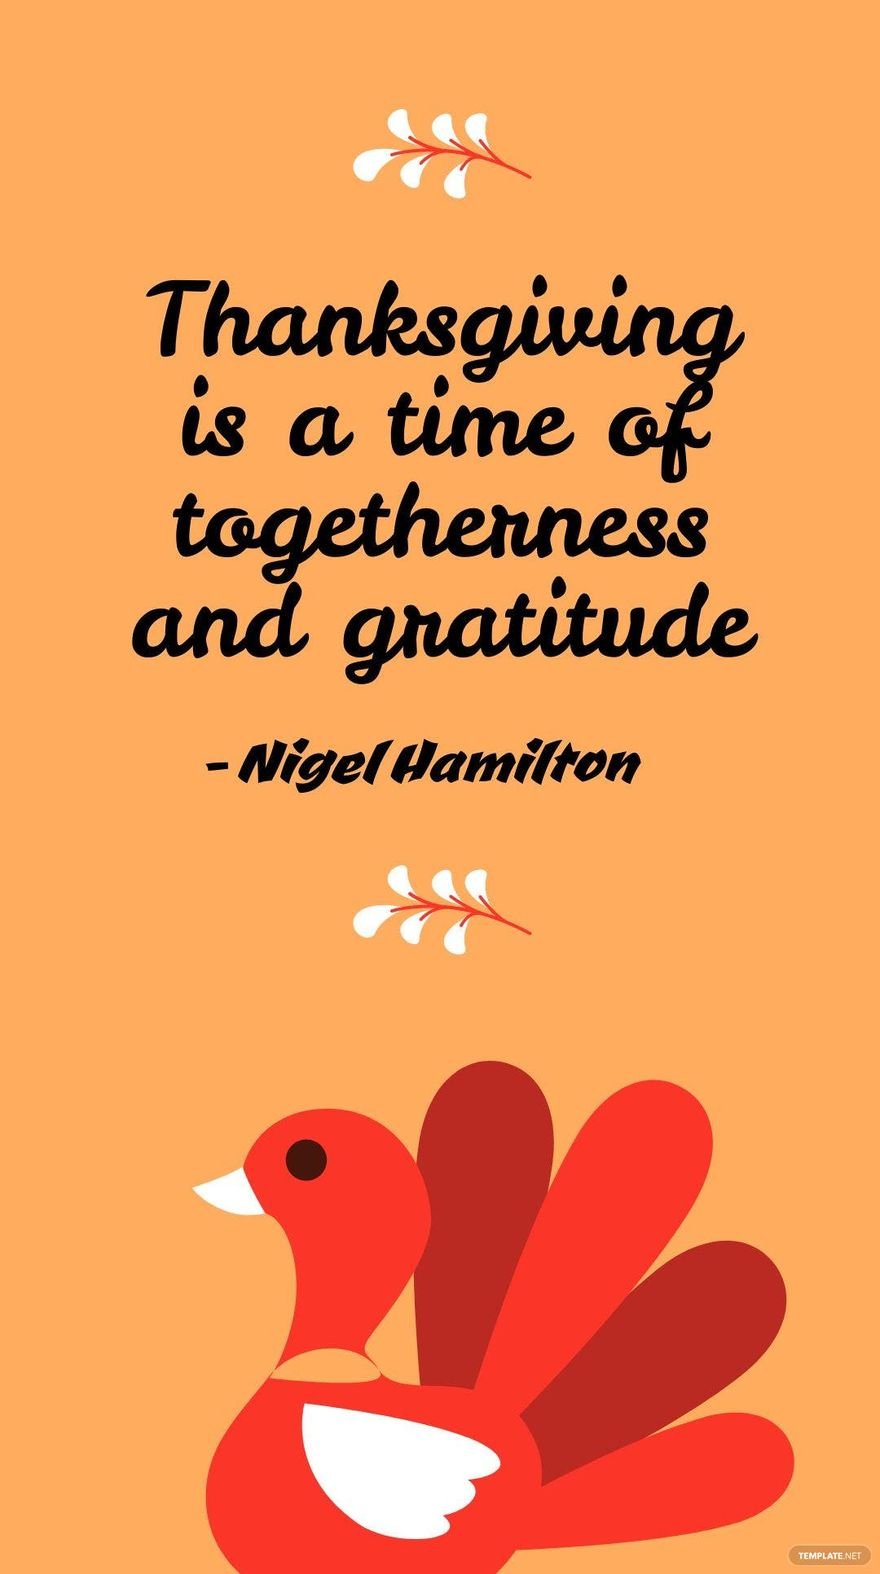 Free Nigel Hamilton - Thanksgiving is a time of togetherness and gratitude